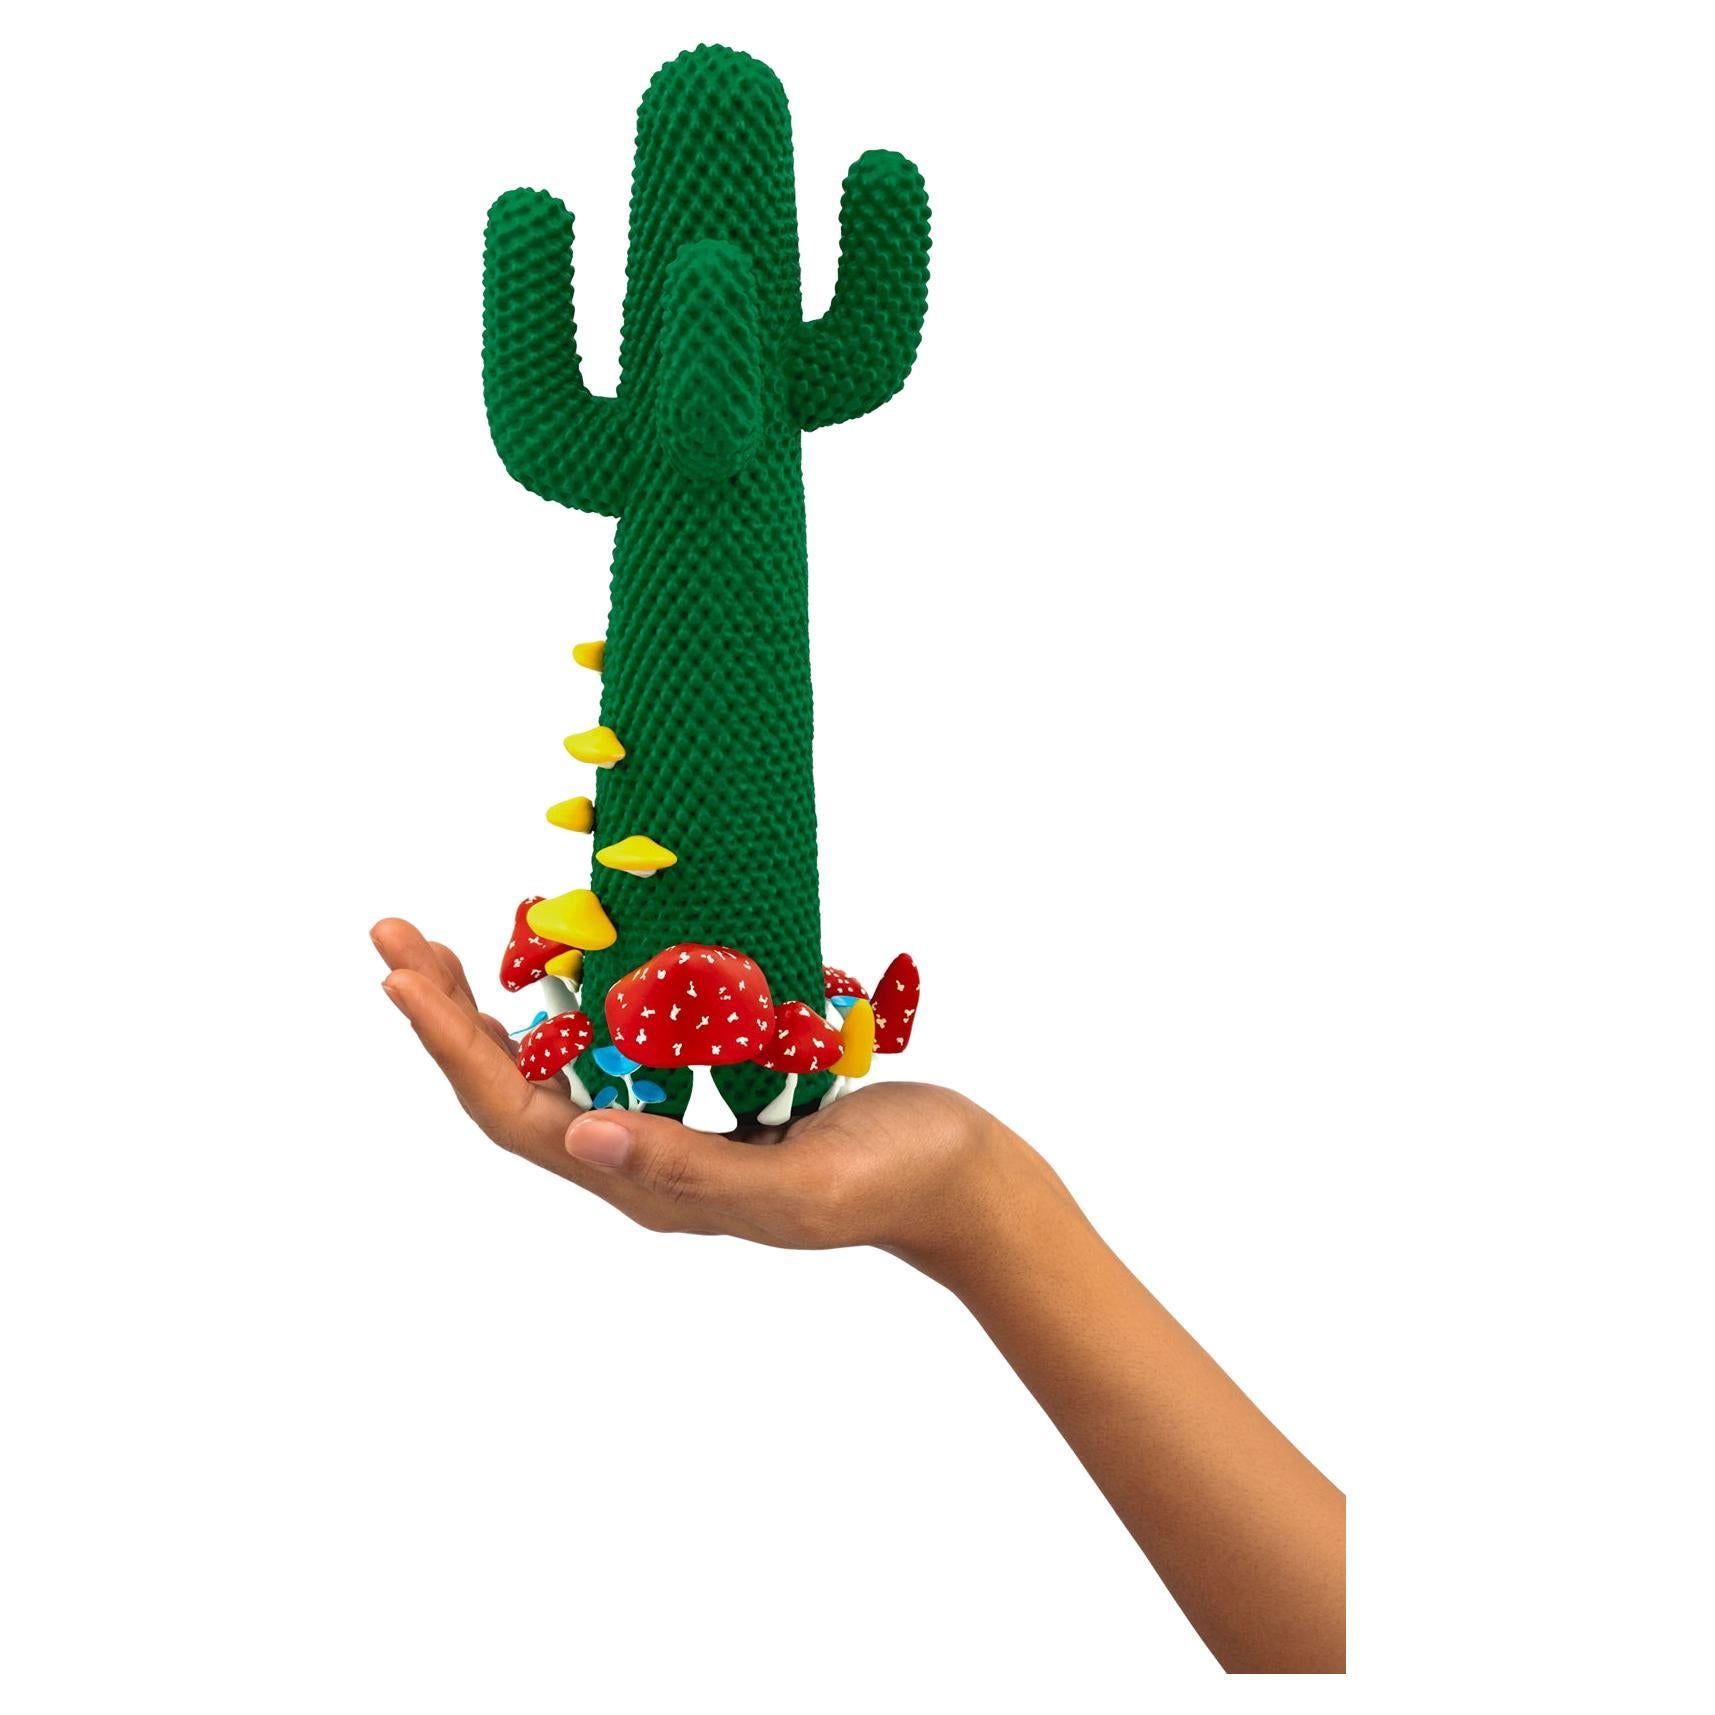 Limited Edition #72/99

Gufram presents the miniaturised version of the Shroom CACTUS® created in collaboration with A$AP Rocky and the artist’s new design studio HOMMEMADE Exactly as the real-size Shroom CACTUS®, the new Guframini piece features